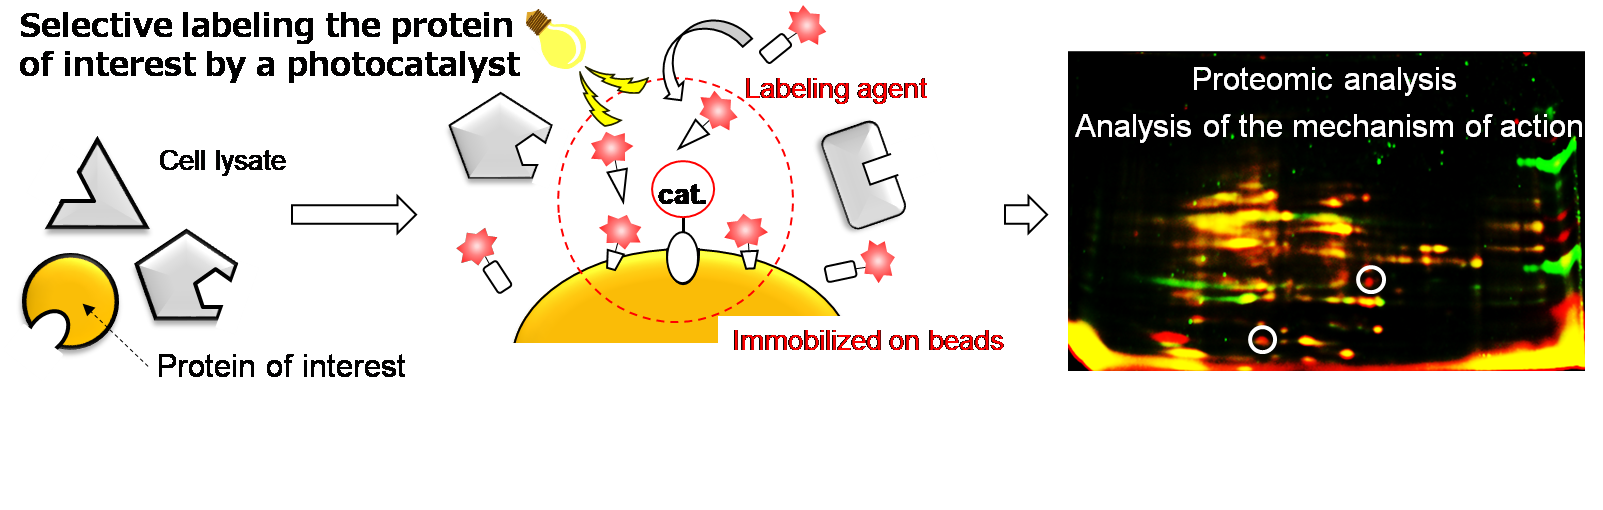 Selective protein labeling using a photoredox catalyst.